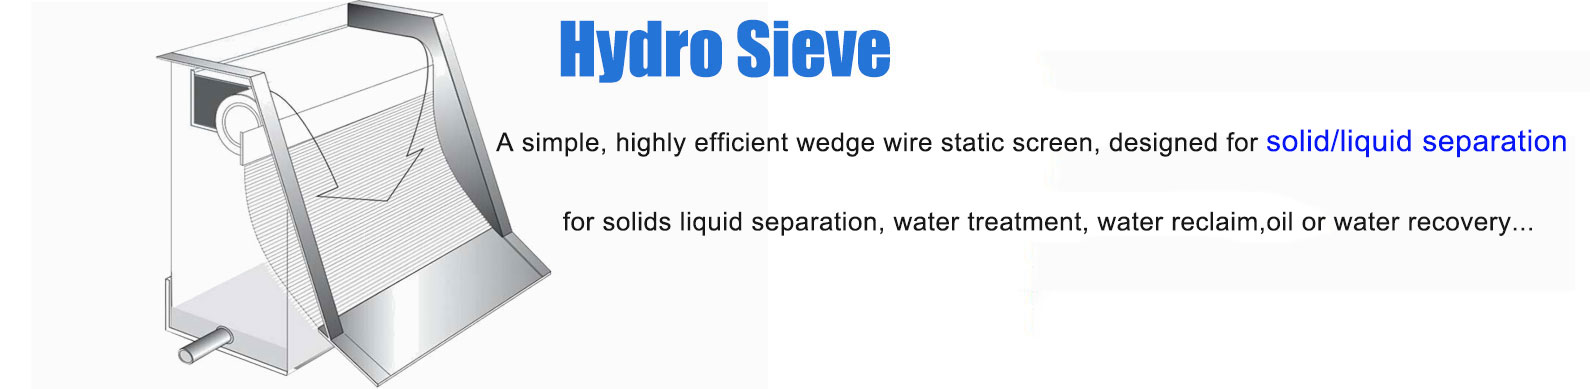 Hydro Sieve static screen filters